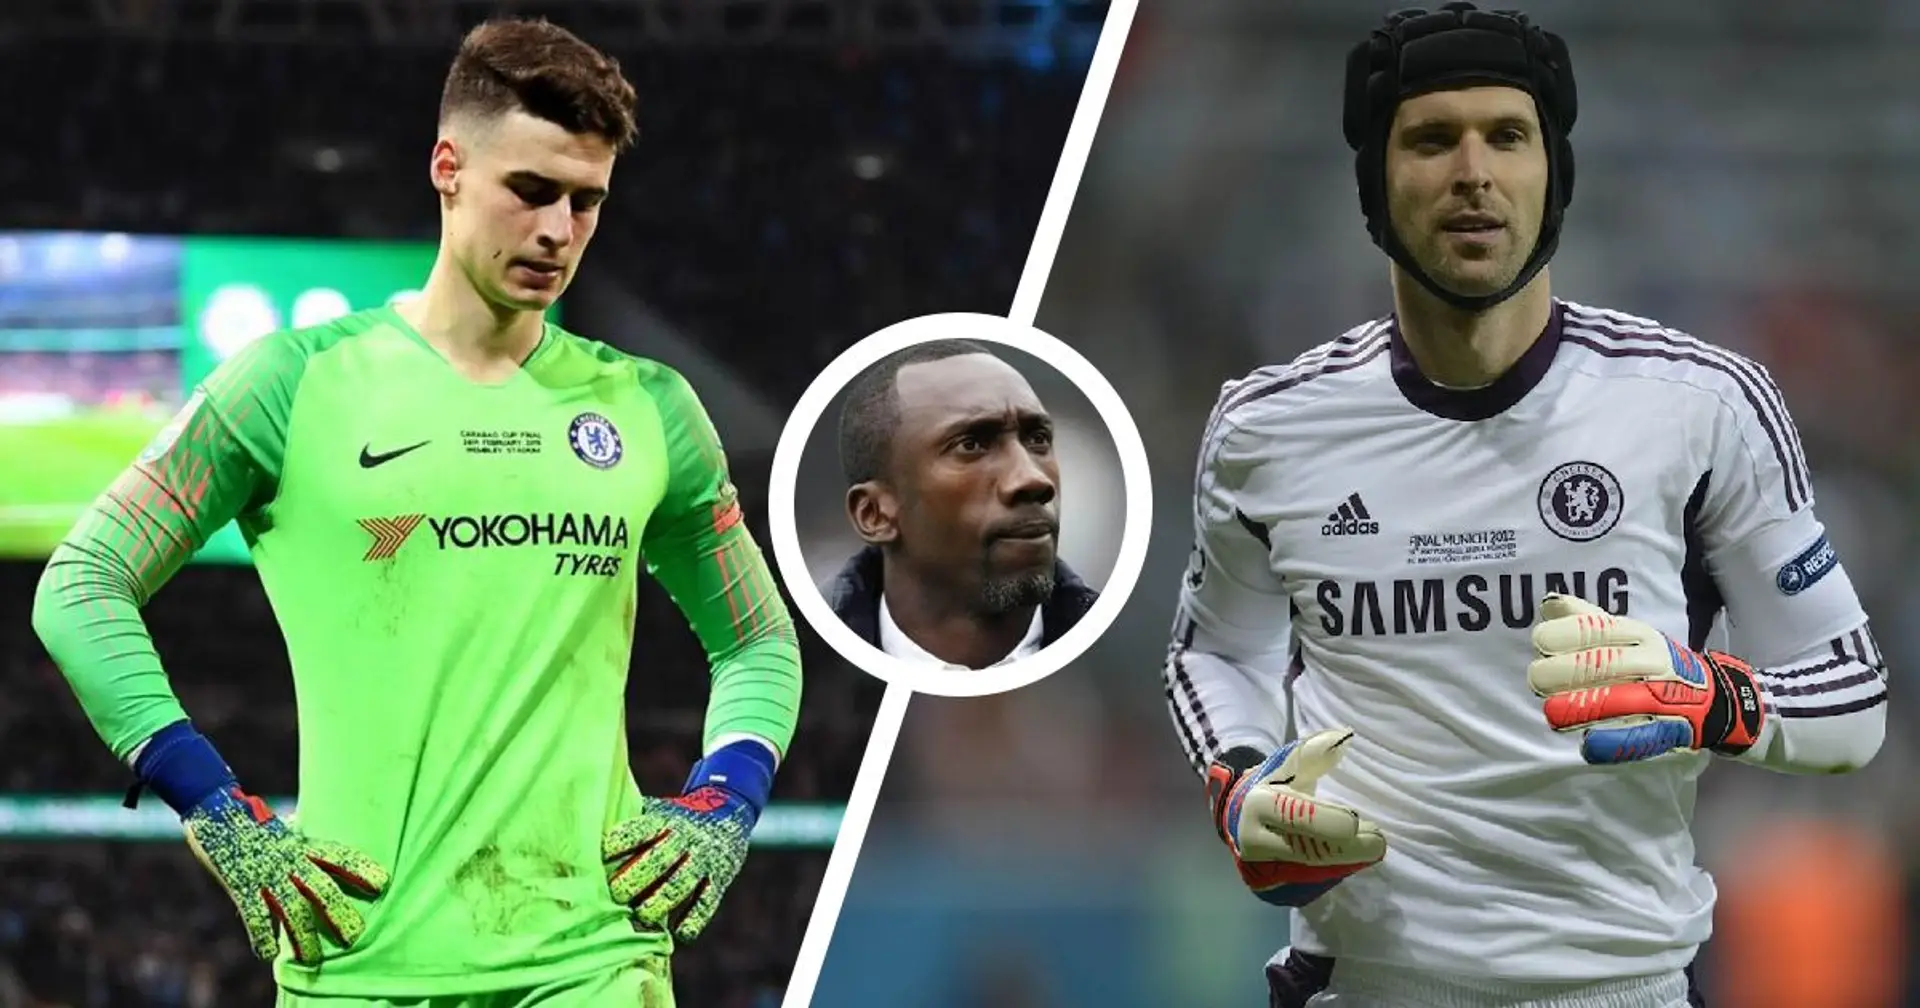 Jimmy Floyd Hasselbaink explains why Kepa must be replaced, uses Petr Cech as example